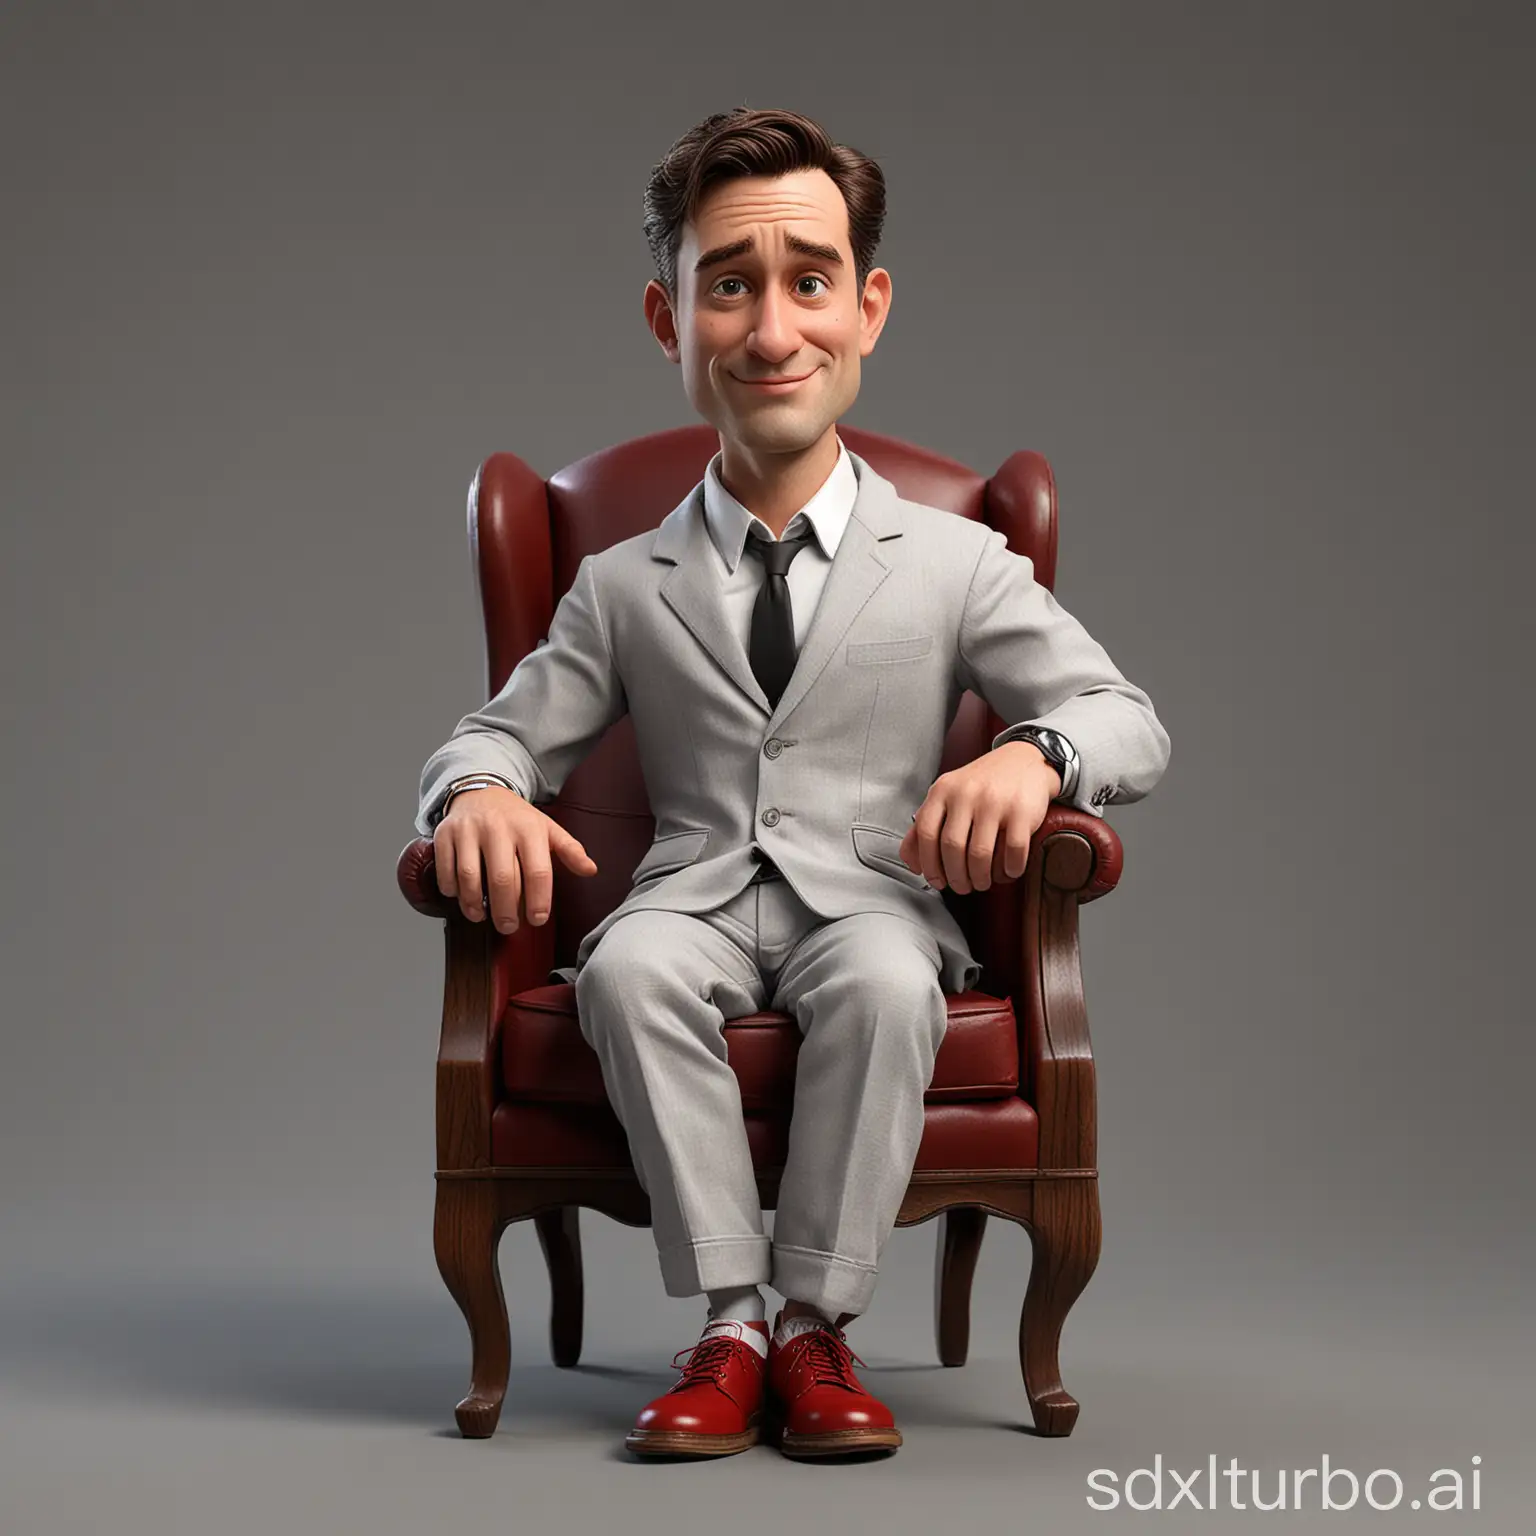 Create a caricature 3D Realistic Disney pixar style full body with a big head. a male photographer, a 40 year old man, is sitting relaxed in a classic dark red wingback wooden chair, the wood texture is clear. Wearing a white t-shirt covered with a gray suit, wearing gray cloth trousers. Wearing white shoes sneakers. Sit with your legs crossed, your right hand holding a camera leica m6, your left hand placed on the edge of the chair. The background should contrast with the color of the chair and clothing,enhancing the overall composition of the picture. Use soft photography lighting, dramatic overhead lighting, very high image quality, clear character details, UHD, 16k.